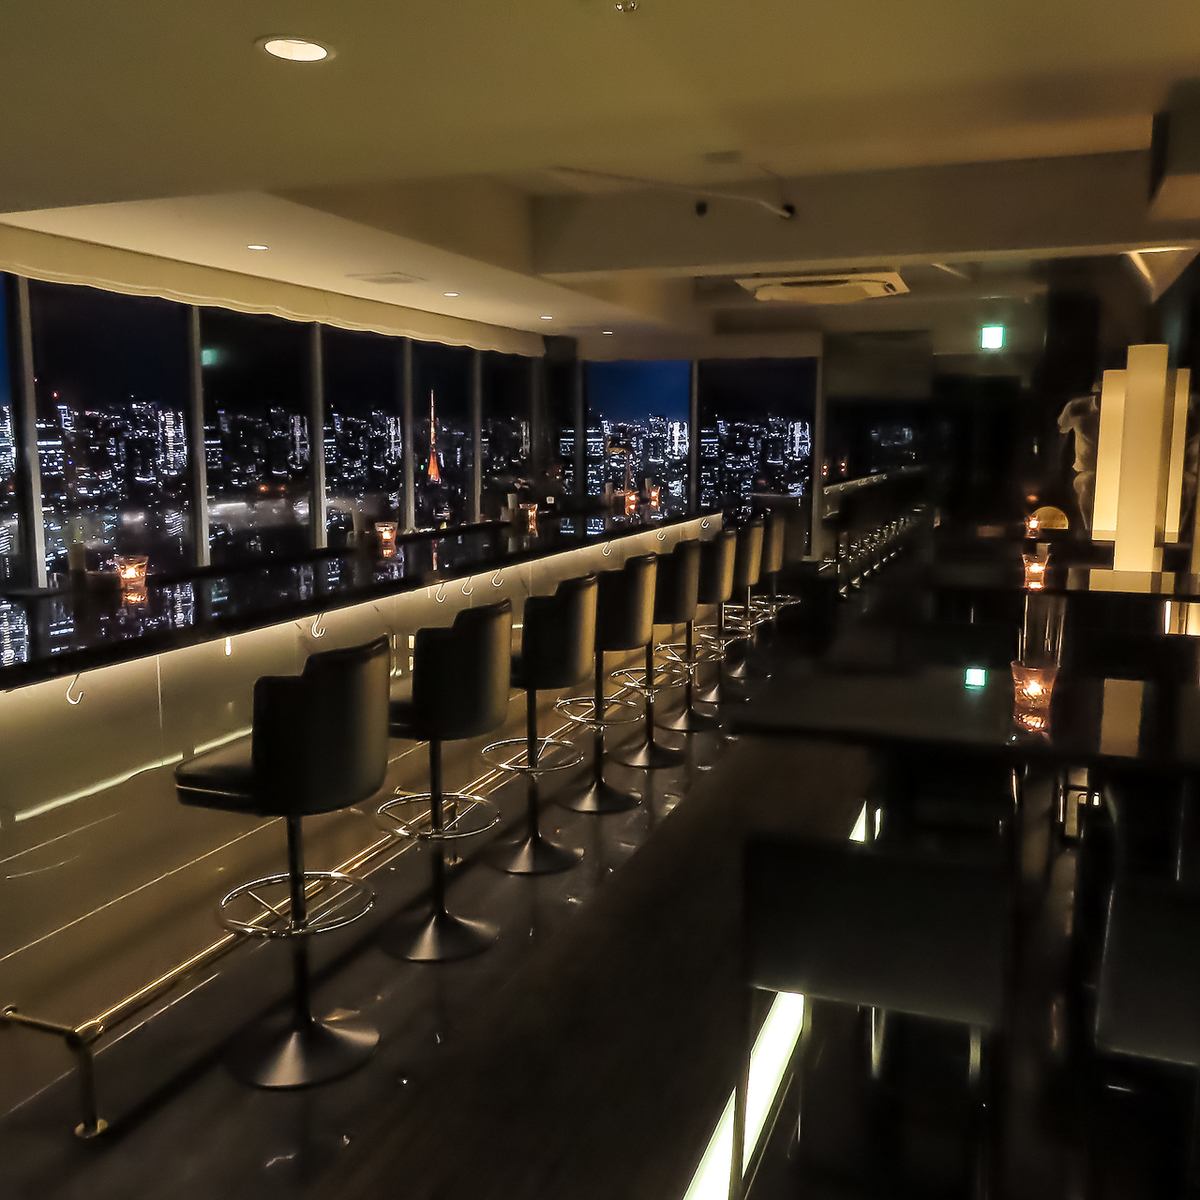 The space is inspired by a night view and has an adult atmosphere, perfect for a date!